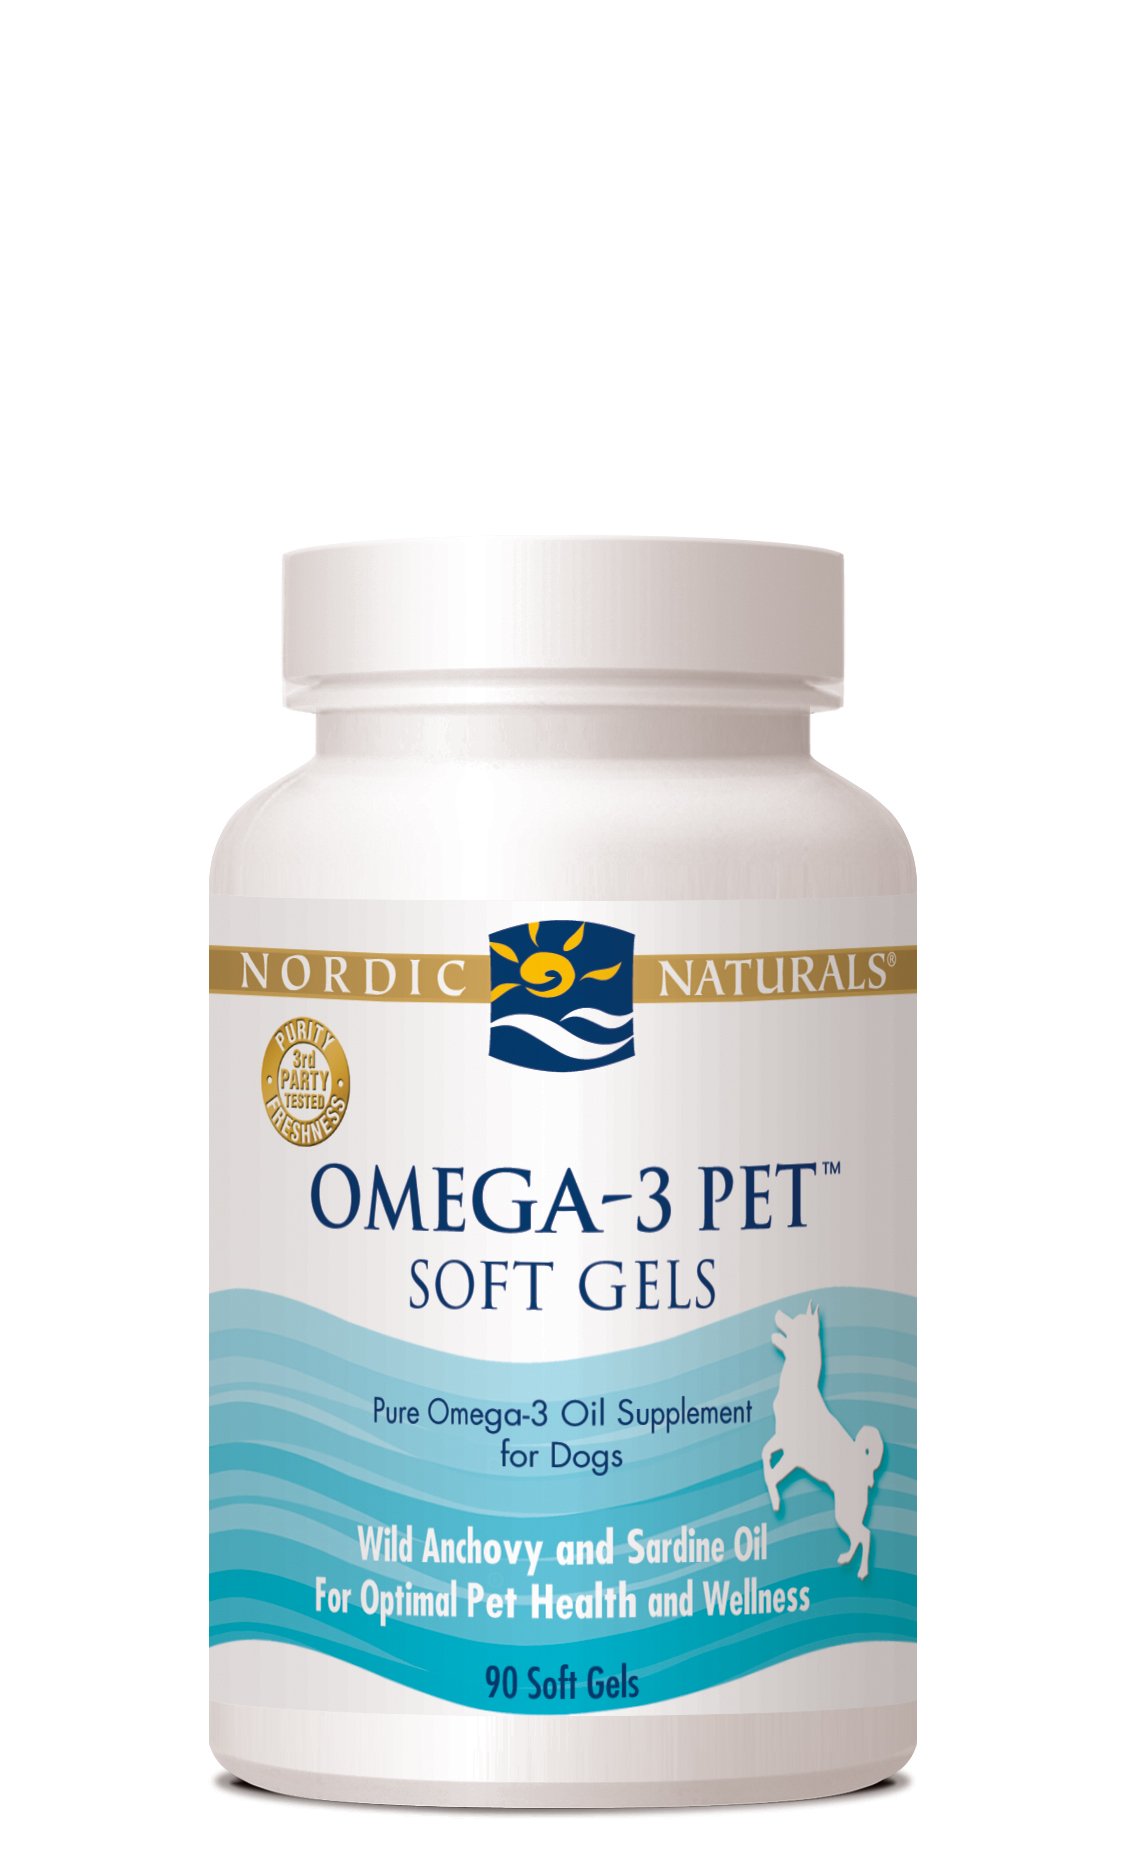 are omega 3 good for dogs